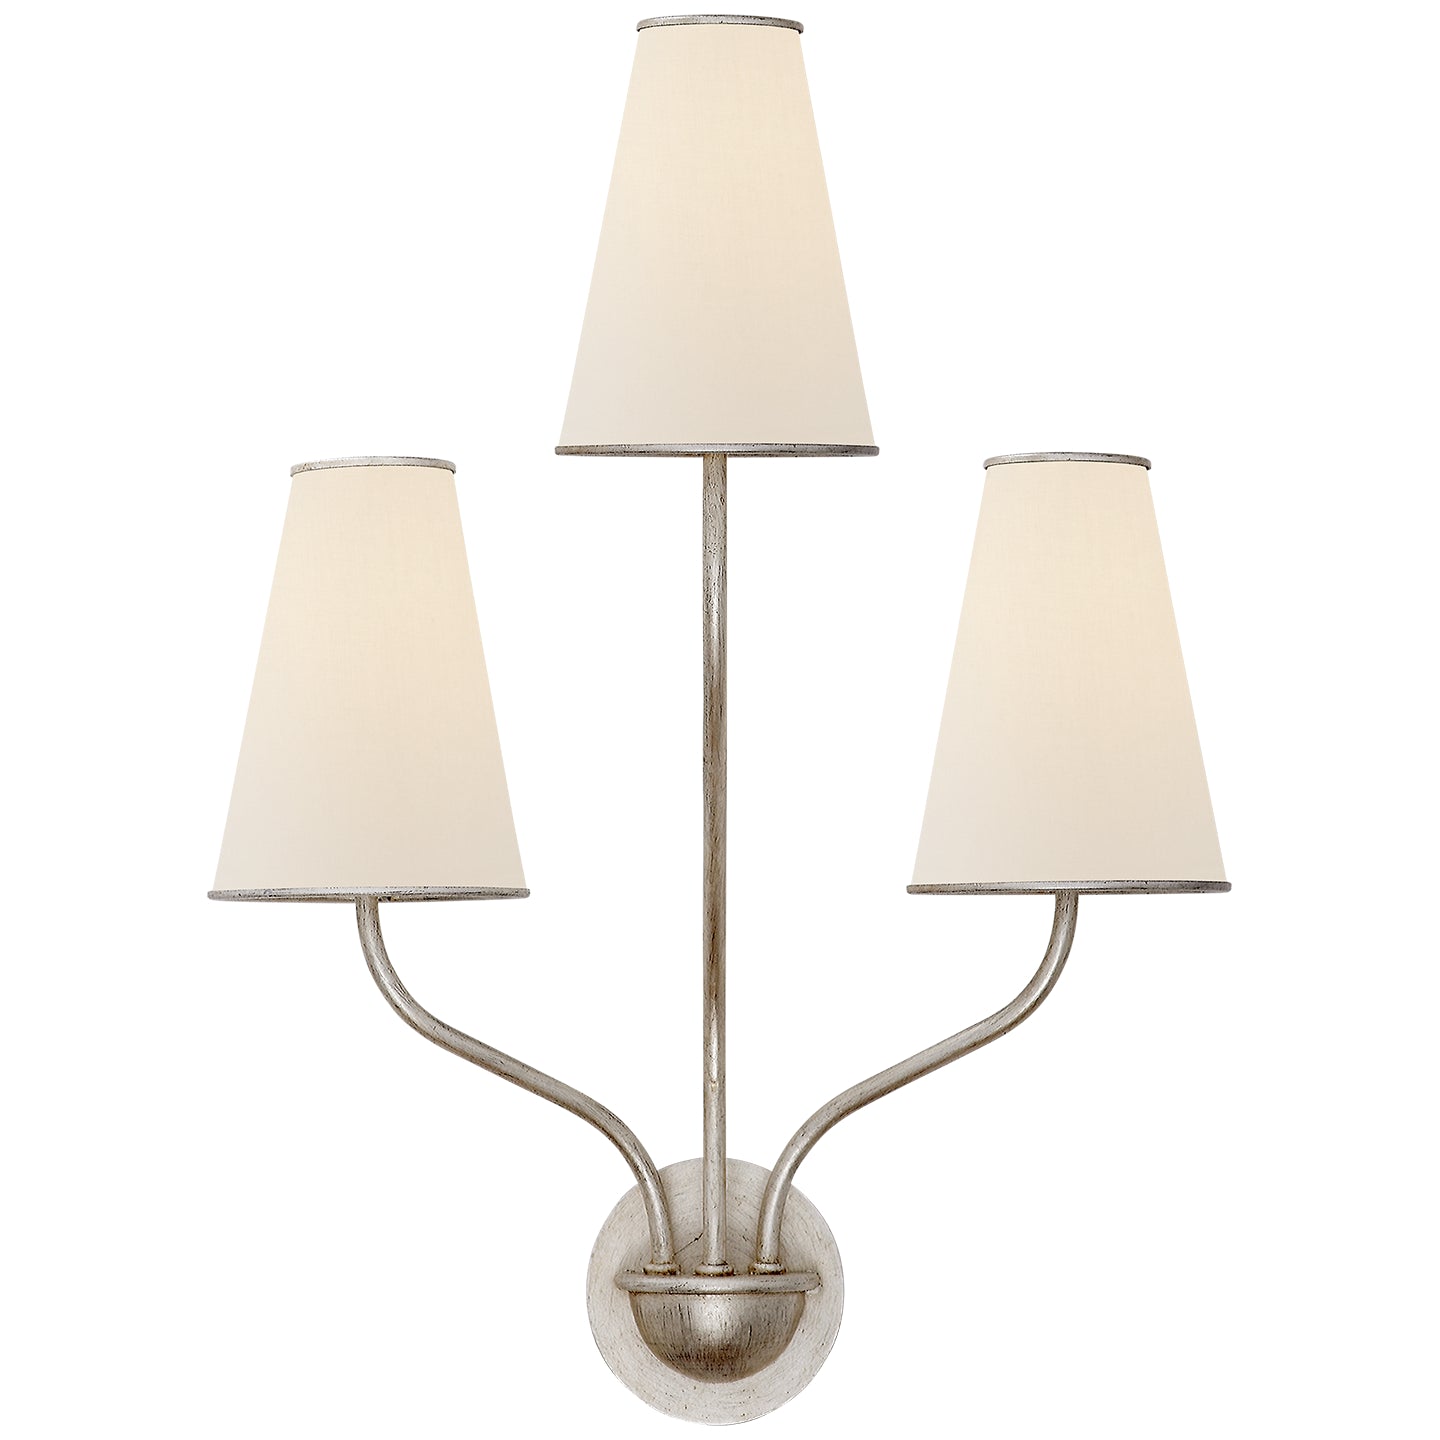 Visual Comfort Signature - ARN 2051BSL-L - Three Light Wall Sconce - Montreuil - Burnished Silver Leaf